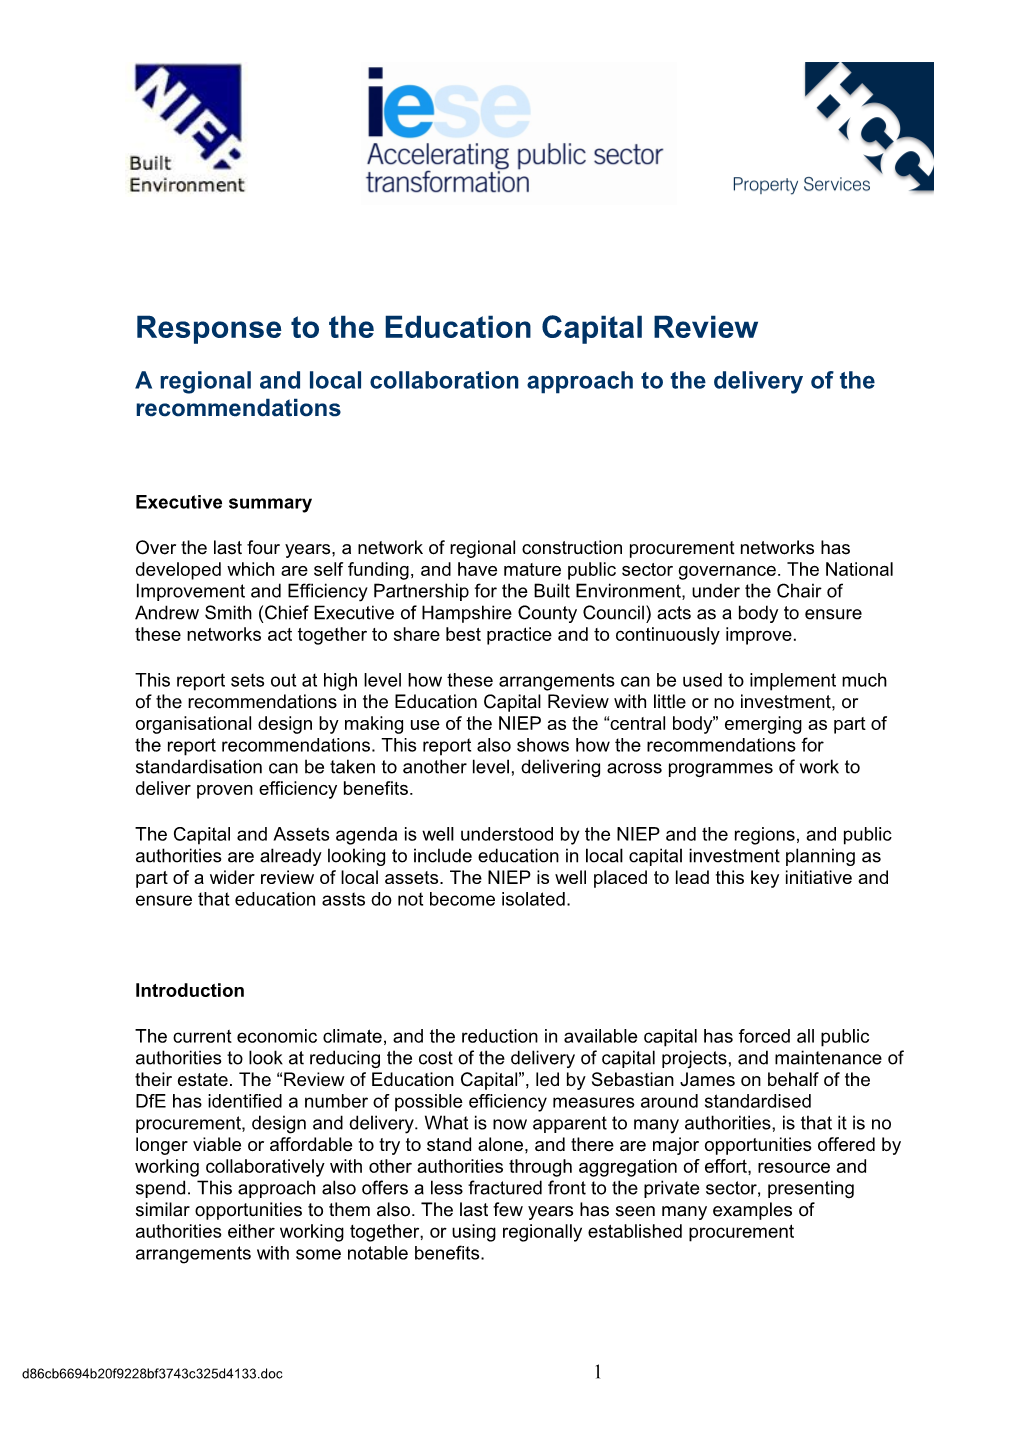 Response to the Education Capital Review